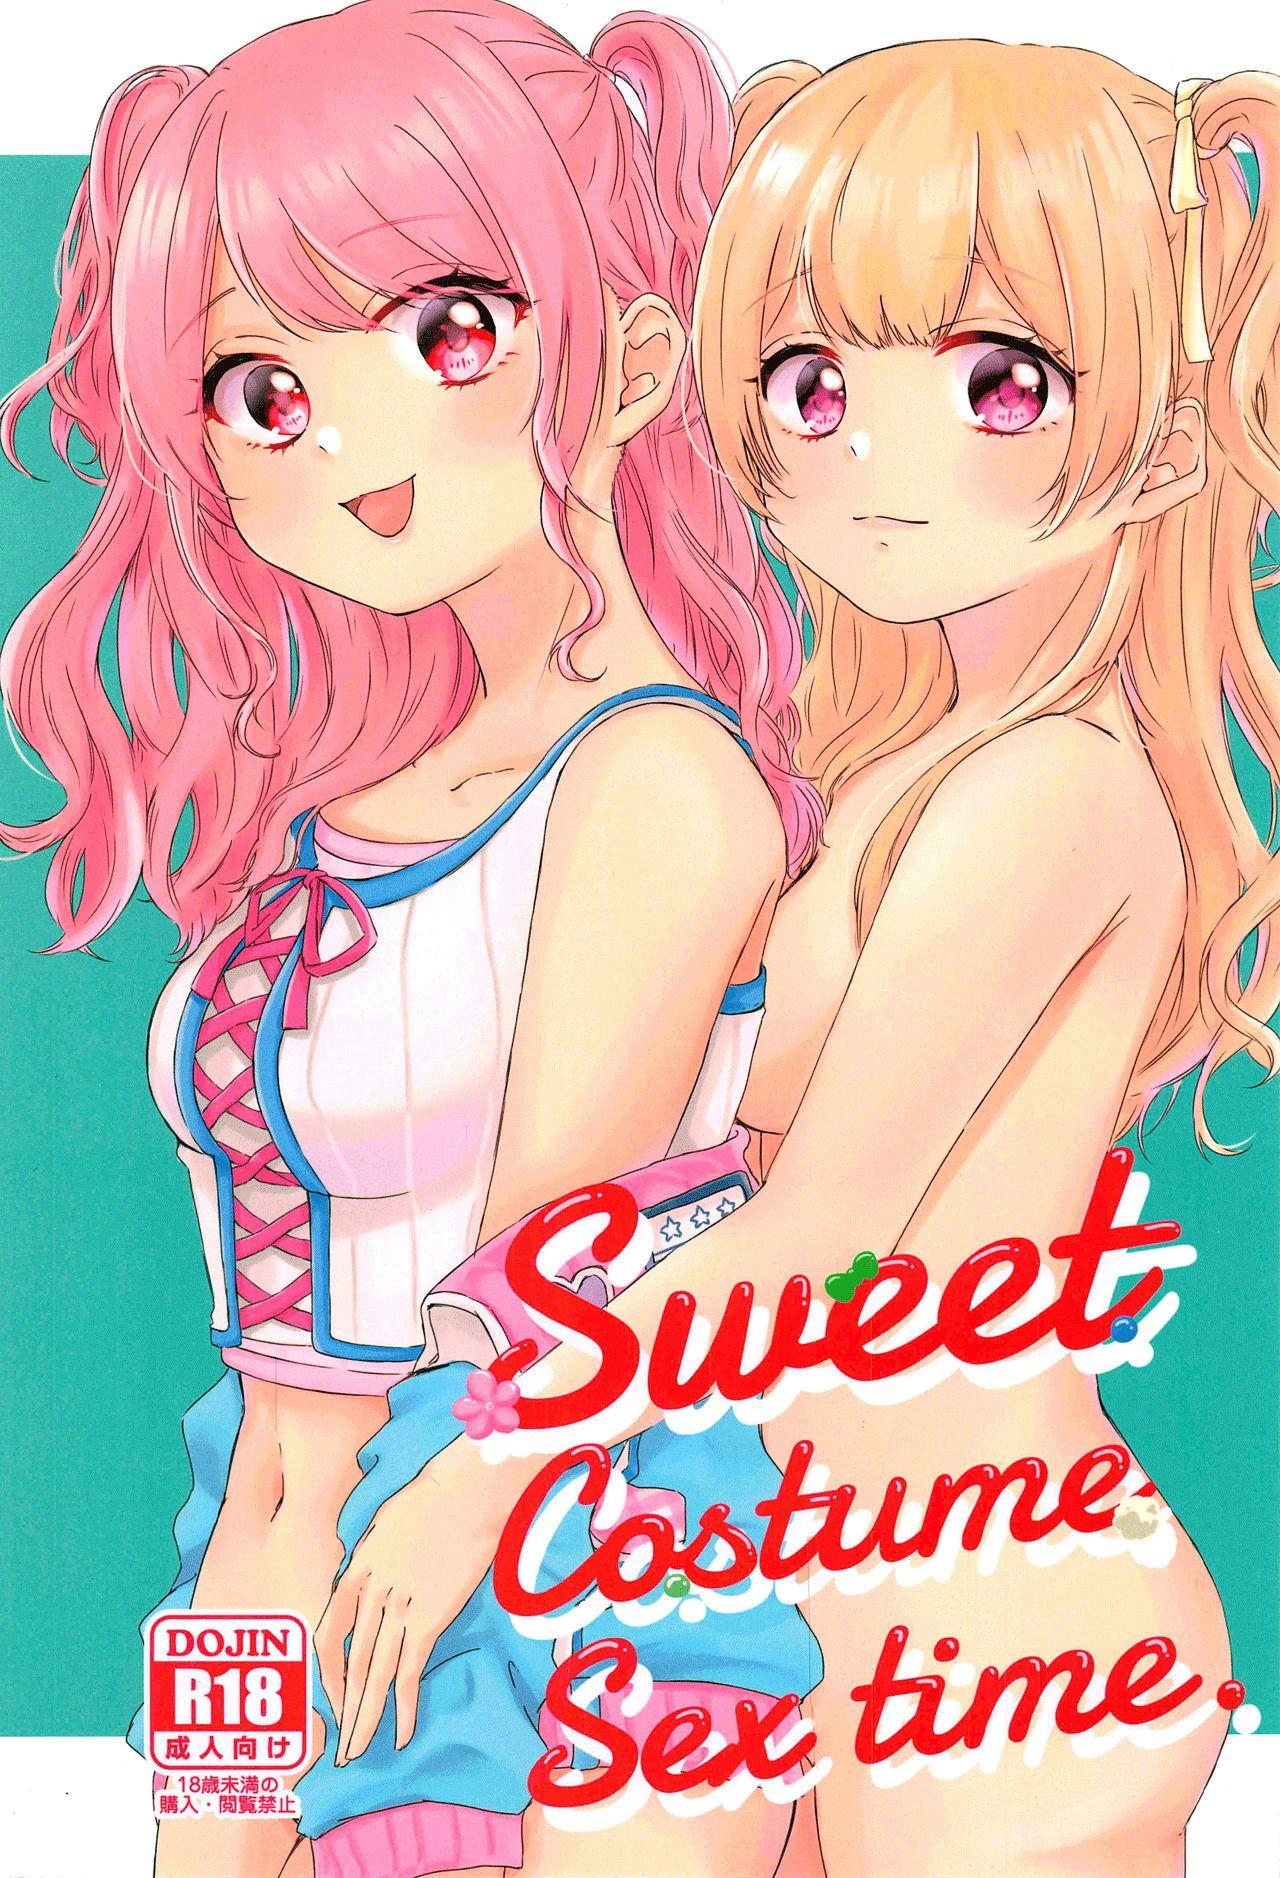 Gay Oralsex Sweet Costume Sex time. - Bang dream Italiano - Page 2